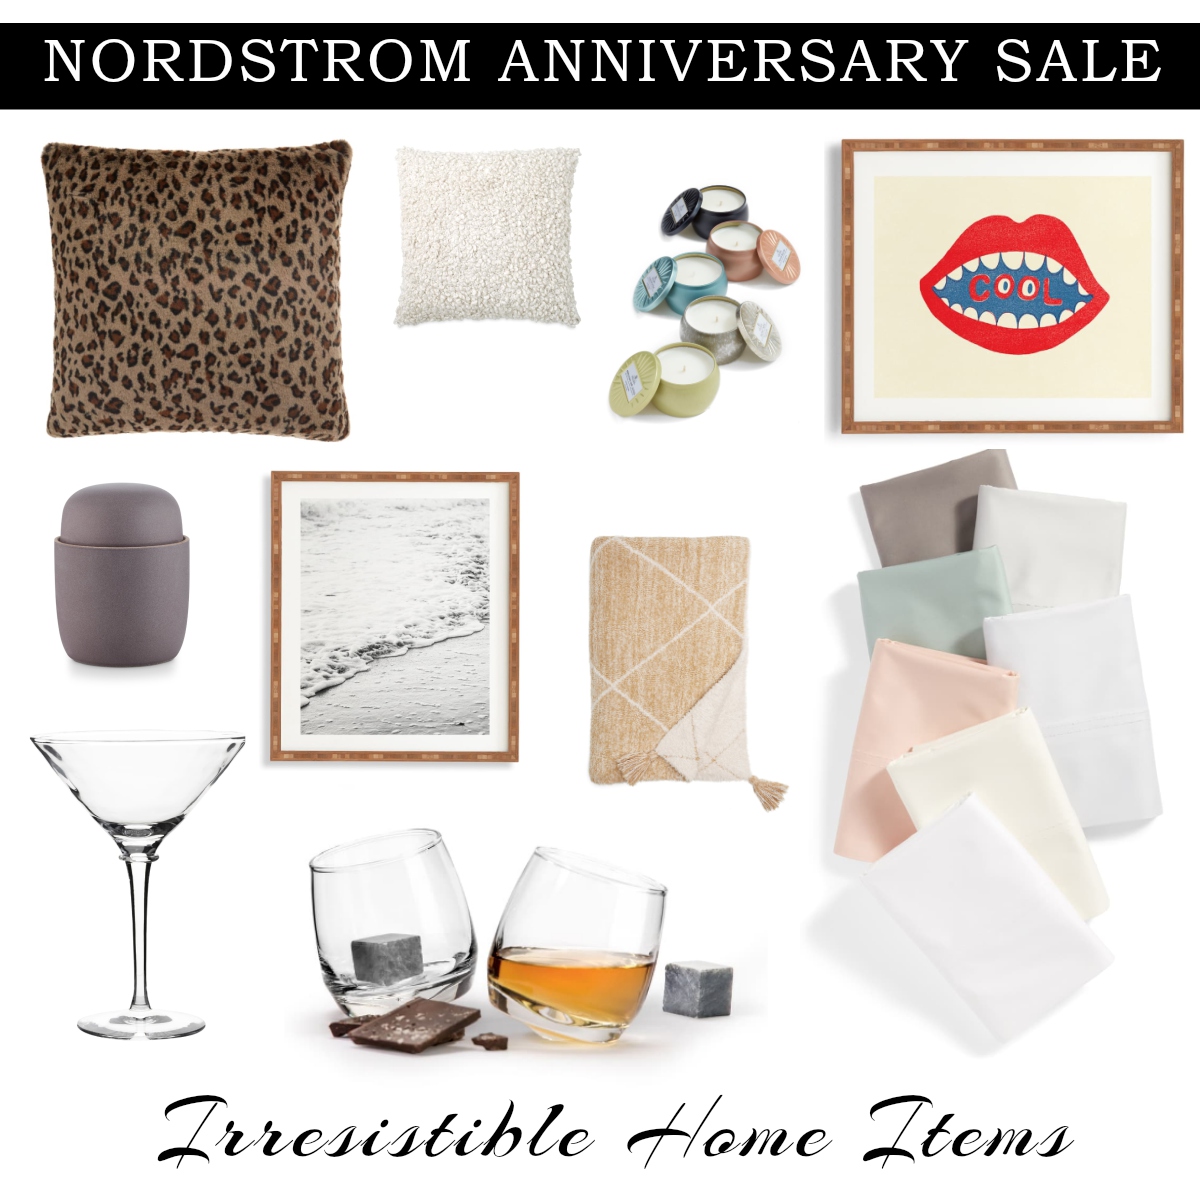 Absolutely Irresistible Home Items To Shop Now from the Nordstrom Anniversary Sale